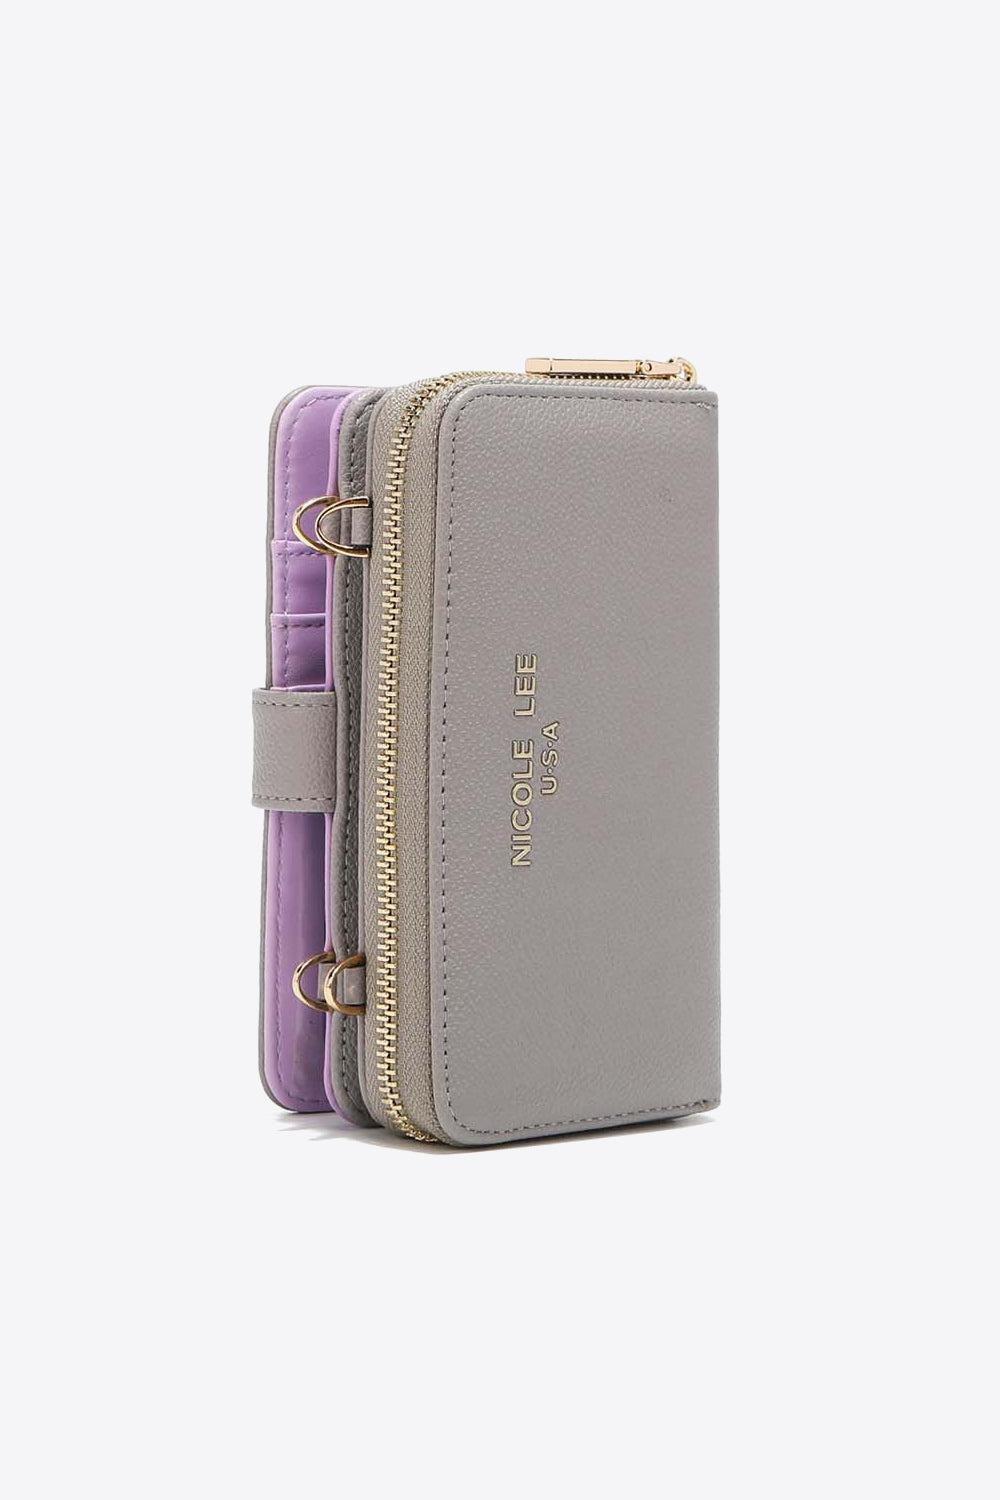 Nicole Lee USA Two-Piece Crossbody Phone Case Wallet BLUE ZONE PLANET